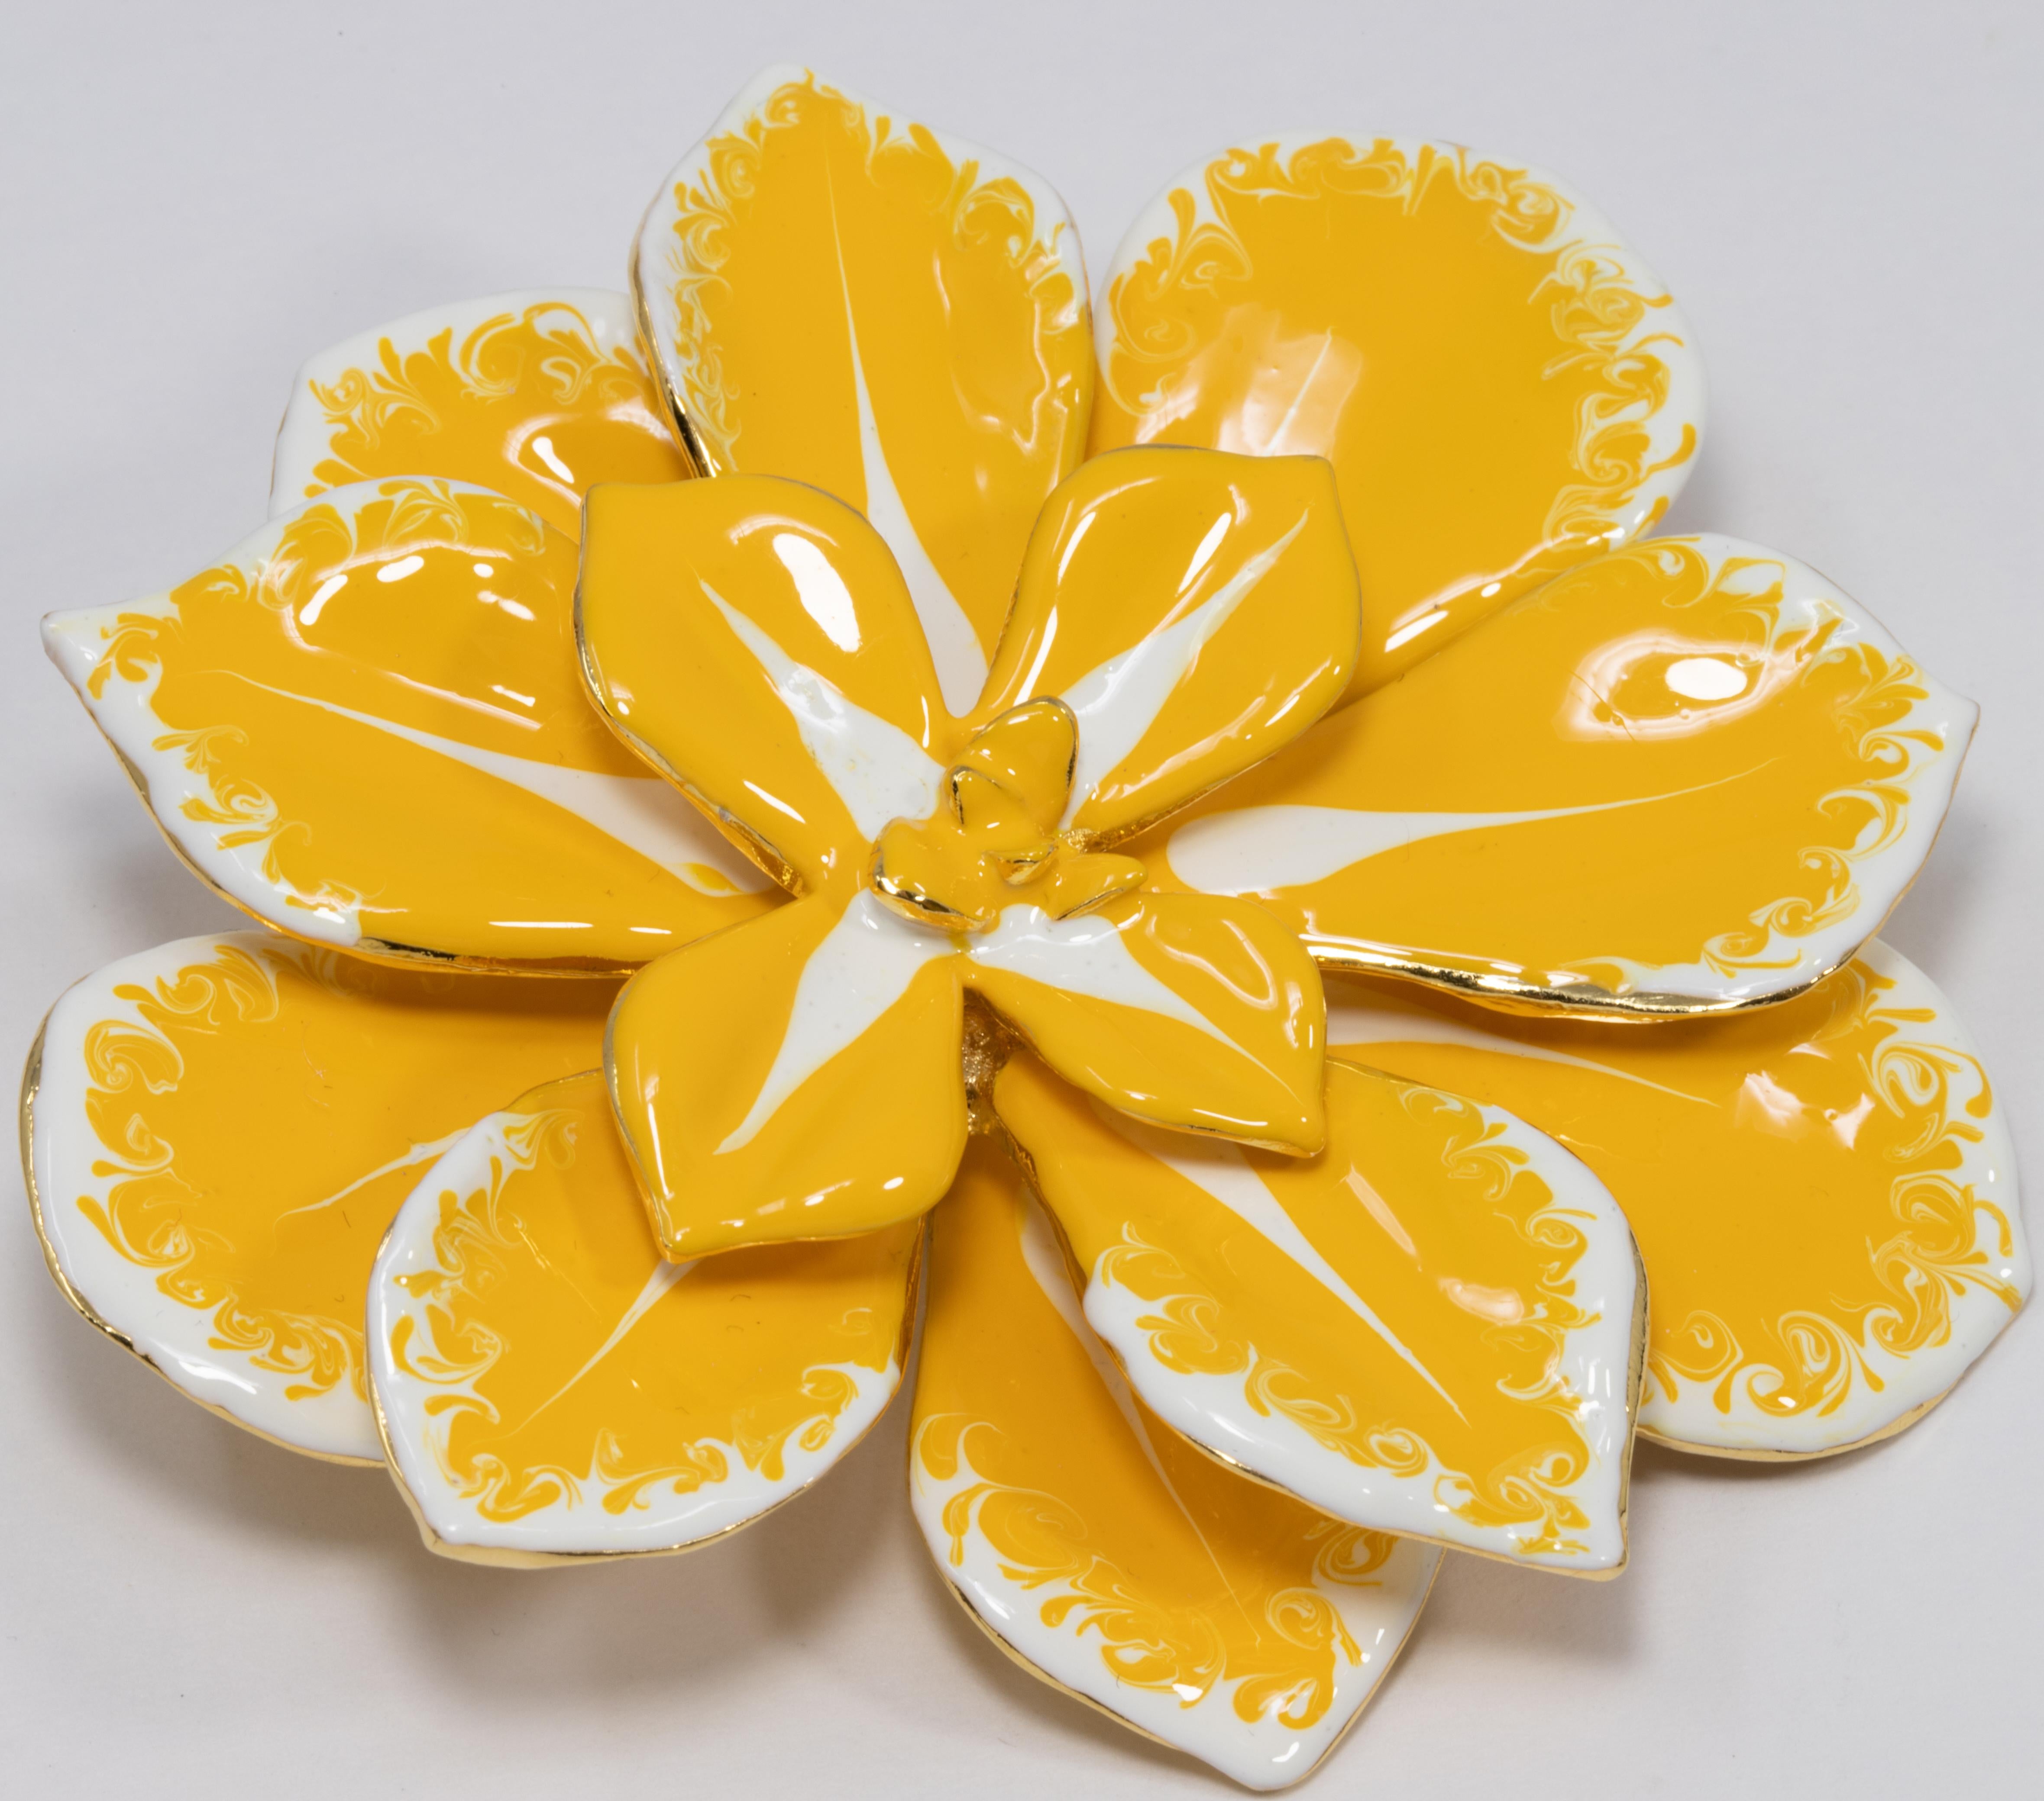 A blooming flower pin brooch by Kenneth Jay Lane! Vibrant yellow and white painted enamel petals on a goldtone metal setting.

Hallmarks: Kenneth © Lane